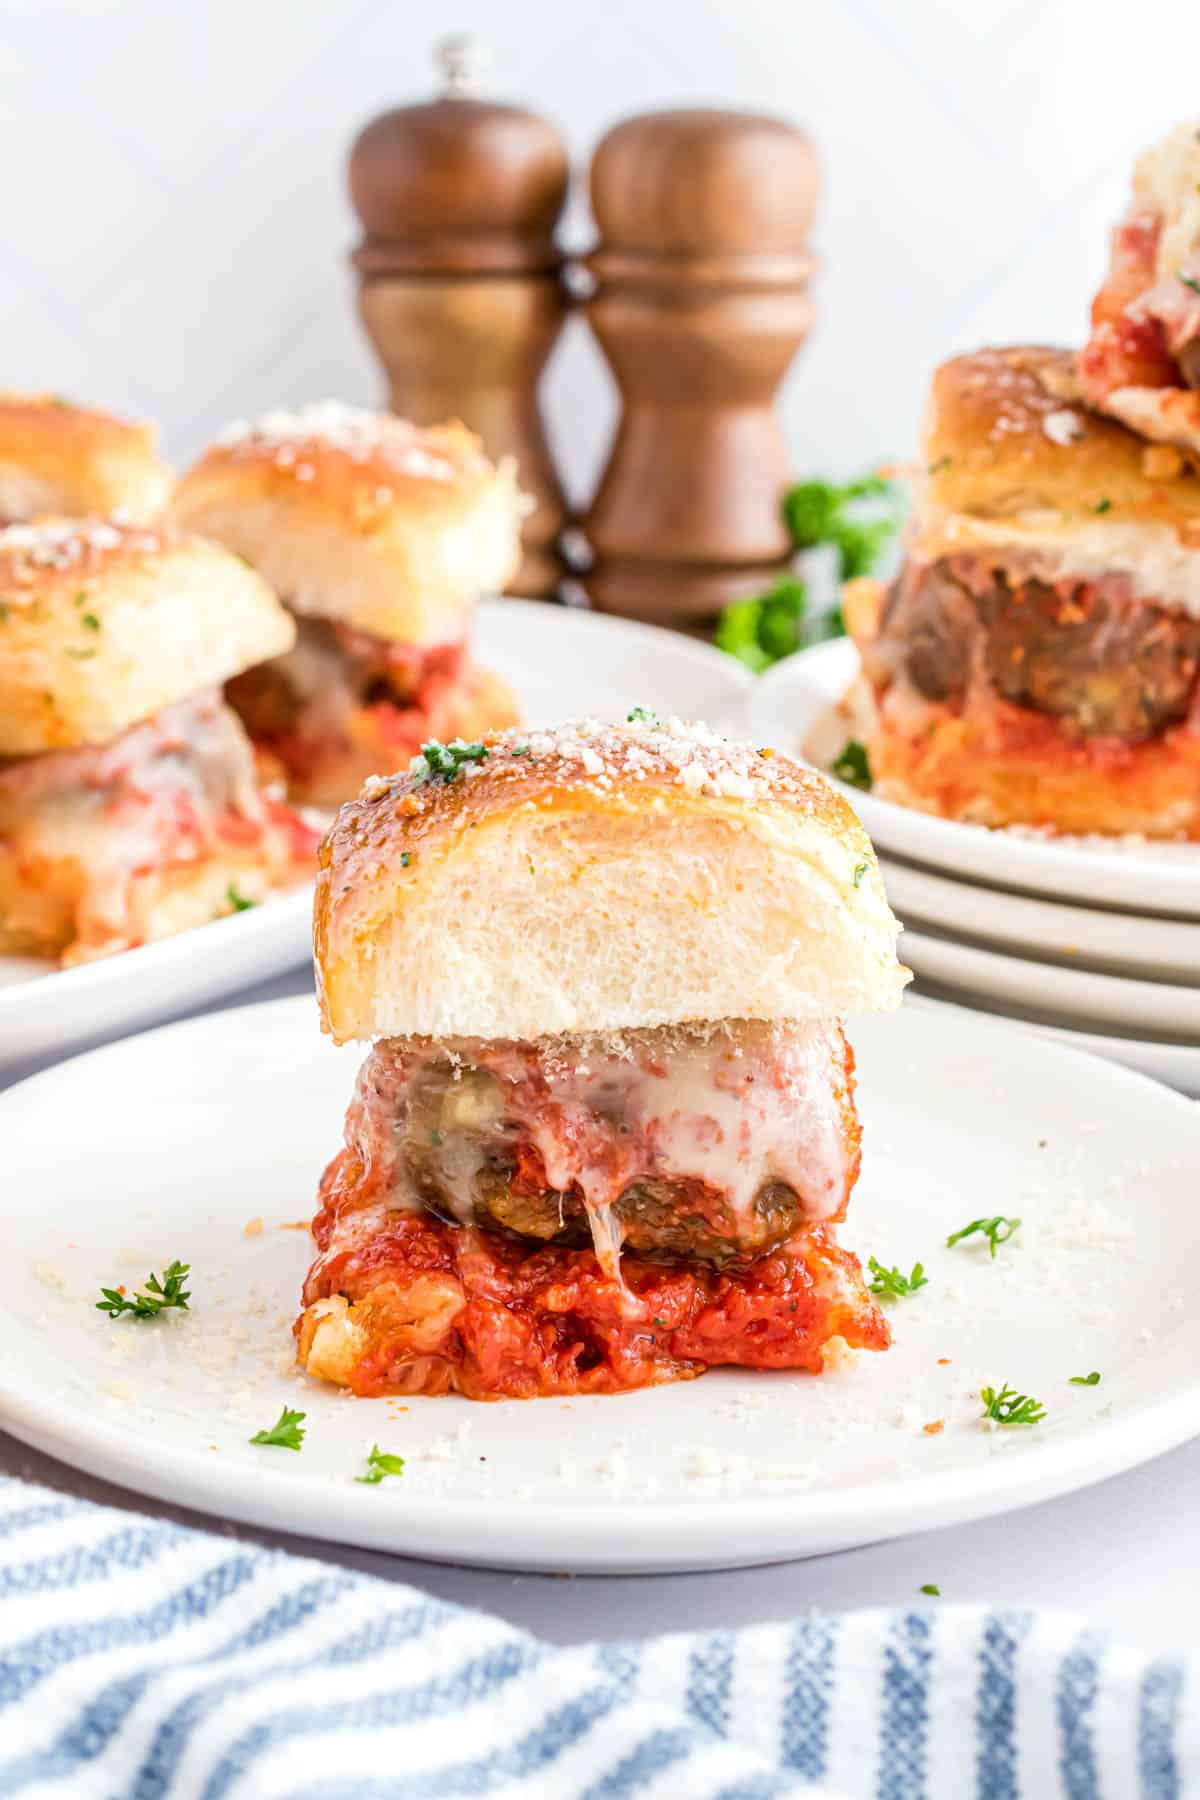 A meatball slider on a white plate.